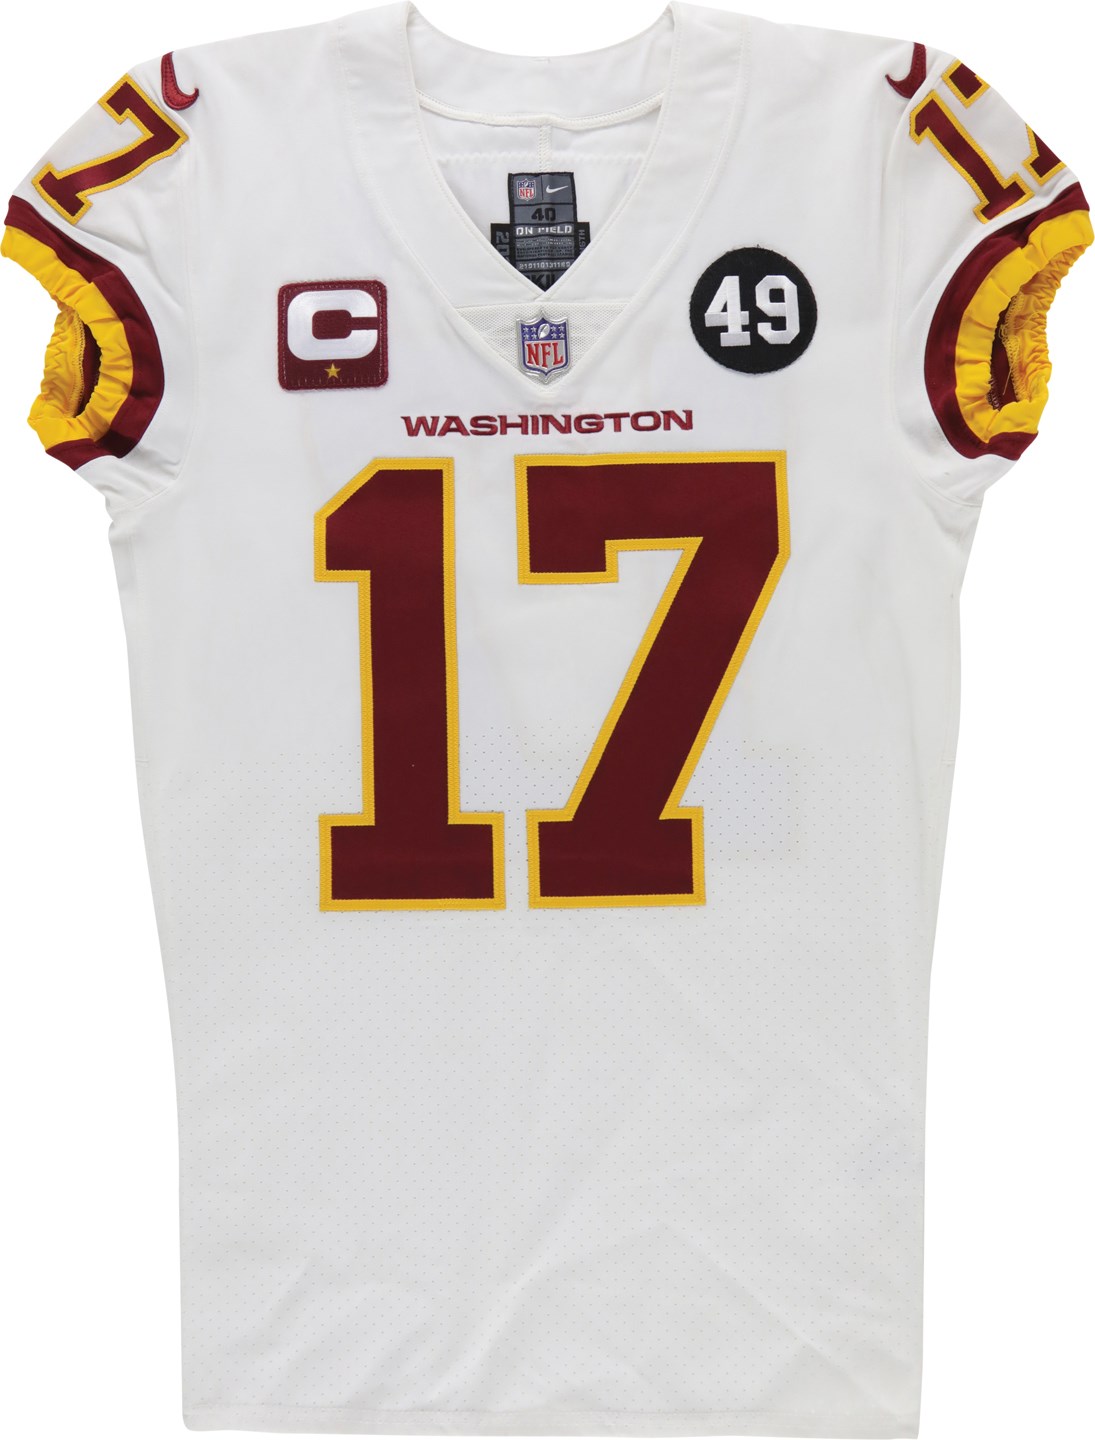 2020 Terry McLaurin Washington Football Team Game Jersey Signed & Inscribed to Adrian Peterson (PSA)